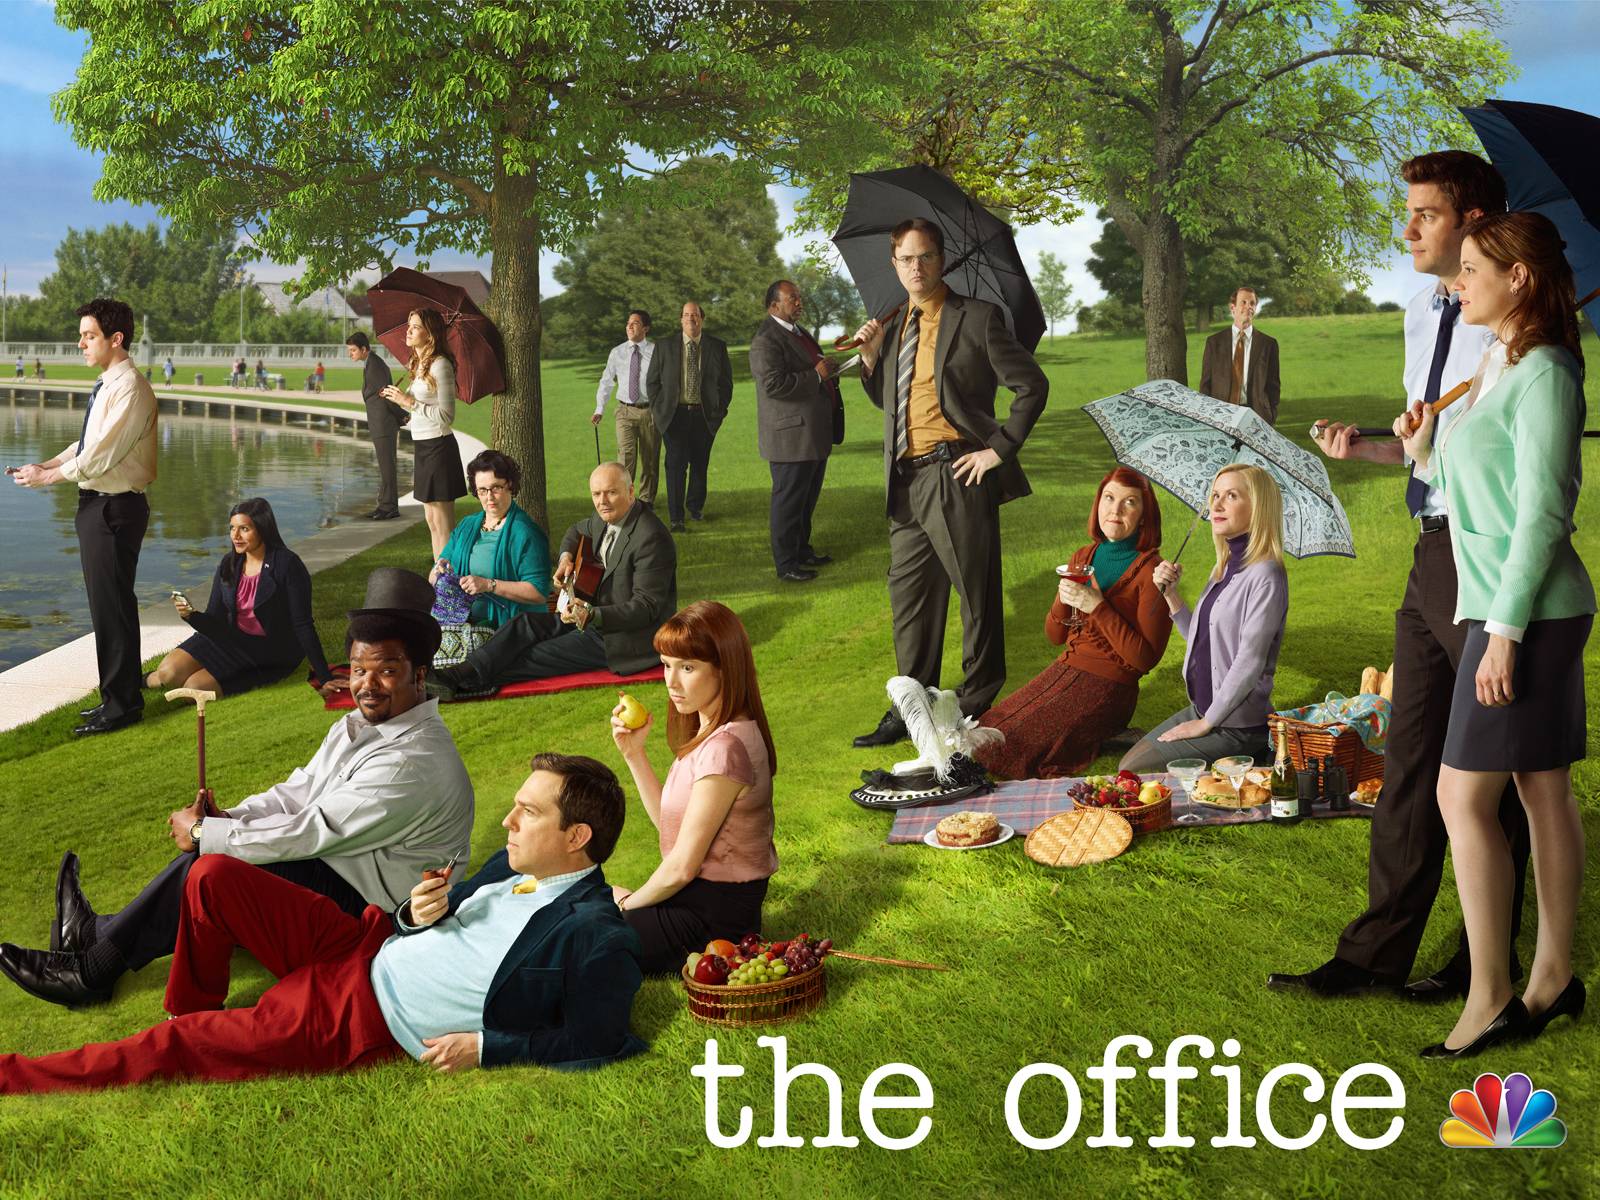 The Office Wallpaper LOLd Wallpaper - Funny Pictures - Funny